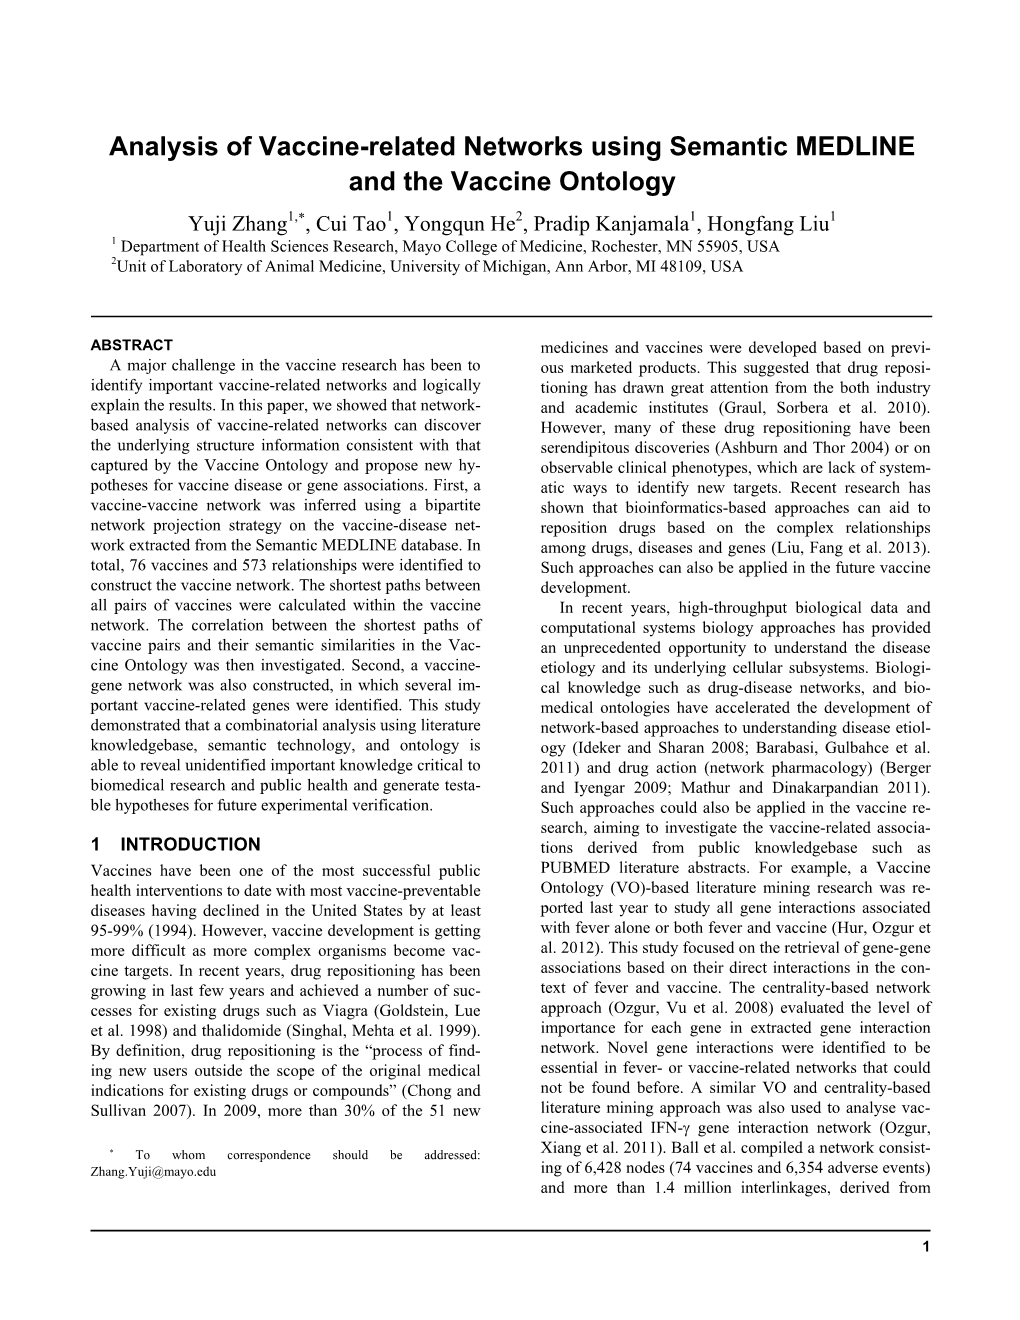 Analysis of Vaccine-Related Networks Using Semantic MEDLINE and the Vaccine Ontology